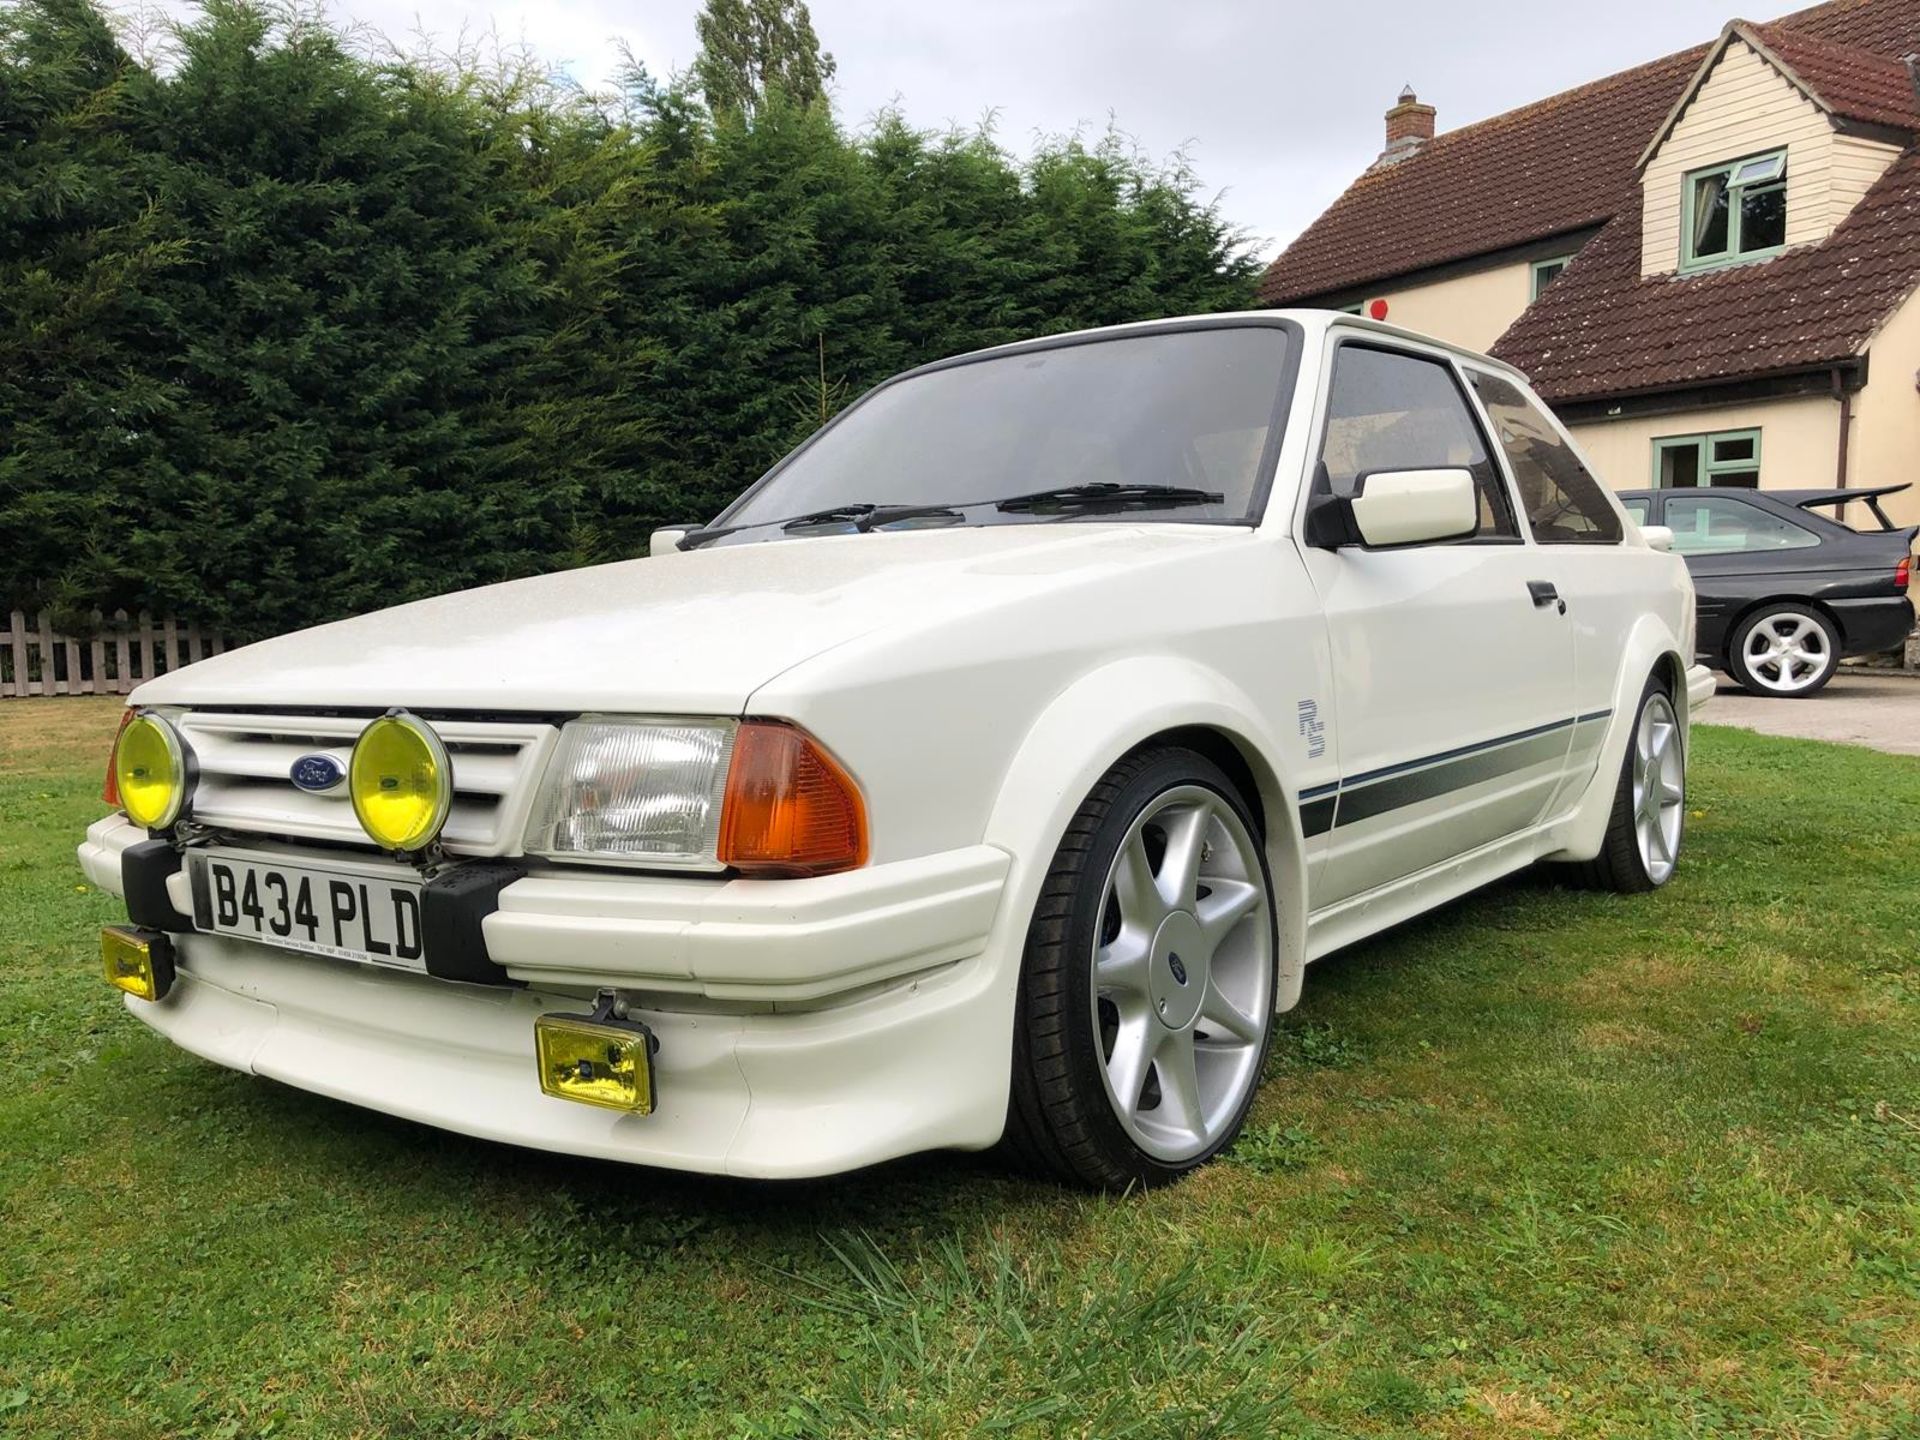 1985 Ford Escort RS Turbo Series 1 Registration number B434 PLD Diamond white with a grey Recaro - Image 57 of 79